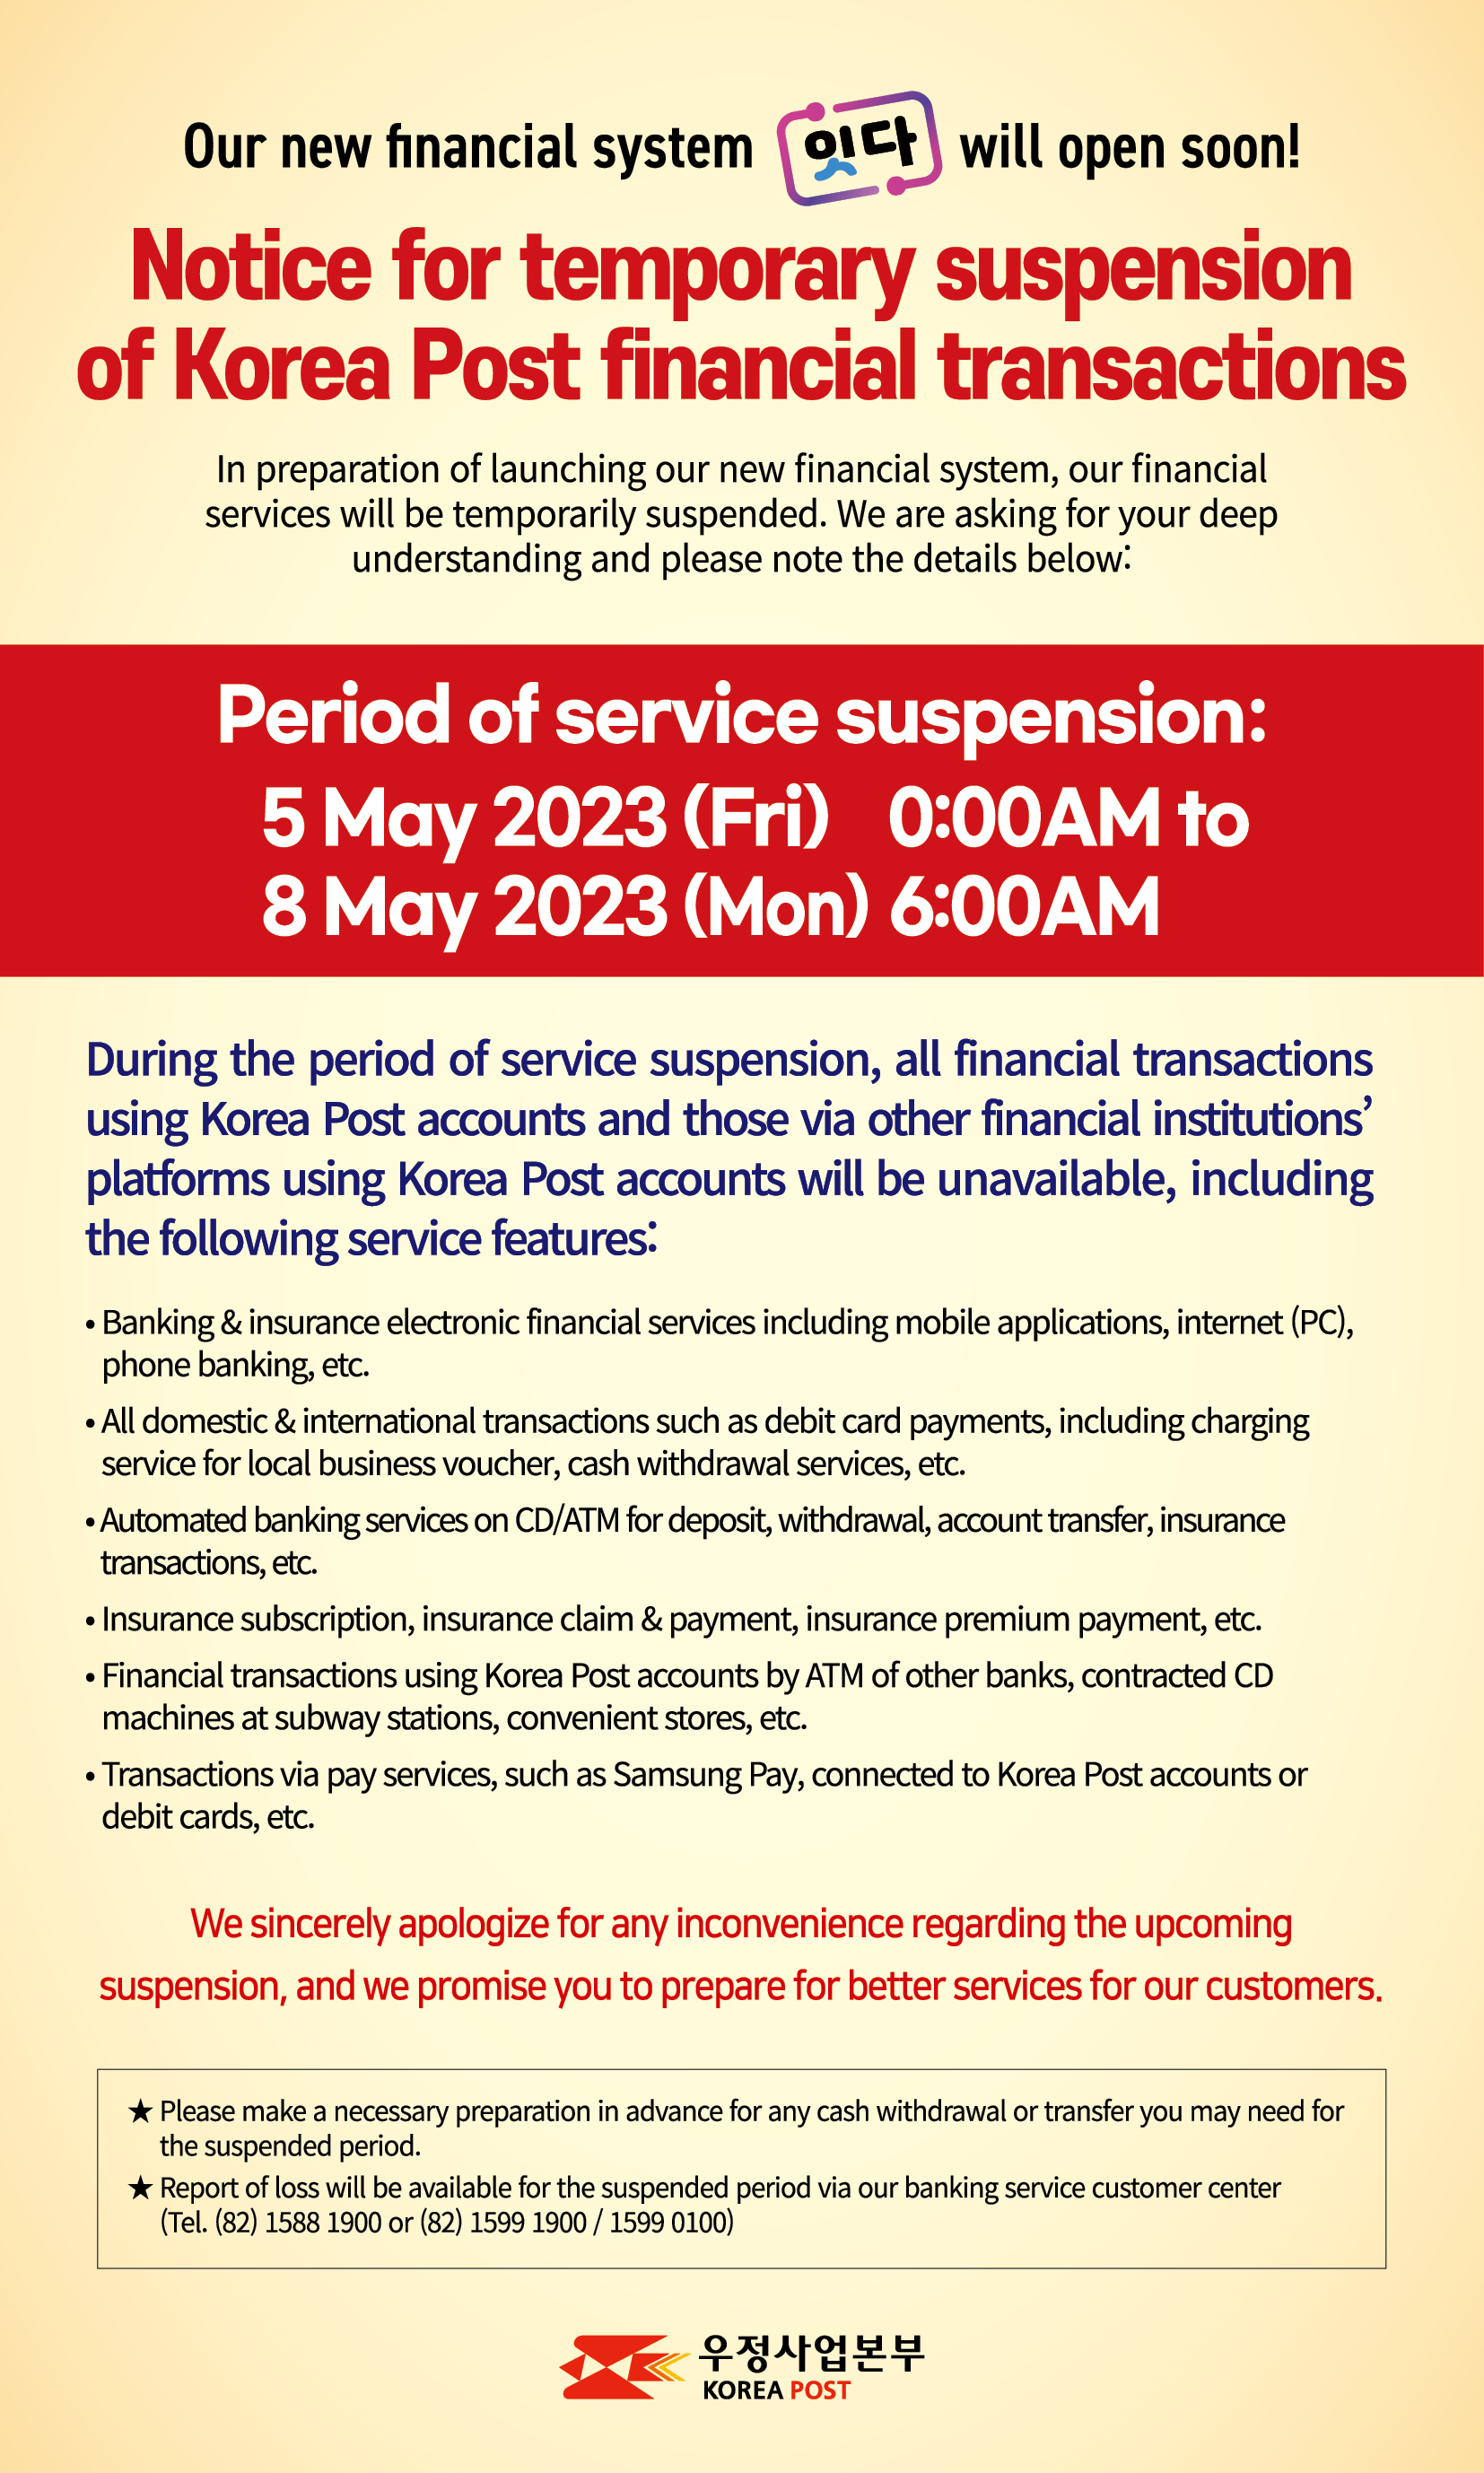 Our new financial system  will open soon!
Notice for temporary suspension 
of Korea Post financial transactions
In preparation of launching our new financial system, our financial services will be temporarily suspended. We are asking for your deep understanding and please note the details below:
Period of service suspension: 
5 May 2023 (Fri) 0:00AM to 8 May 2023 (Mon) 6:00AM
During the period of service suspension, all financial transactions using Korea Post accounts and those via other financial institutions’ platforms using Korea Post accounts will be unavailable, including the following service features: 
- Banking & insurance electronic financial services including mobile applications, internet (PC), phone banking, etc.
- All domestic & international transactions such as debit card payments, including charging service for local business voucher, cash withdrawal services, etc.
- Automated banking services on CD/ATM for deposit, withdrawal, account transfer, insurance transactions, etc. 
- Insurance subs-c-r-i-p-tion, insurance claim & payment, insurance premium payment, etc.
- Financial transactions using Korea Post accounts by ATM of other banks, contracted CD machines at subway stations, convenient stores, etc. 
- Transactions via pay services, such as Samsung Pay, connected to Korea Post accounts or debit cards, etc.
 We sincerely apologize for any inconvenience regarding the upcoming suspension, and we promise you to prepare for better services for our customers.
* Please make a necessary preparation in advance for any cash withdrawal or transfer you may need for the suspended period.
* Report of loss will be available for the suspended period via our banking service customer center (Tel. (82) 1588 1900 or (82) 1599 1900)